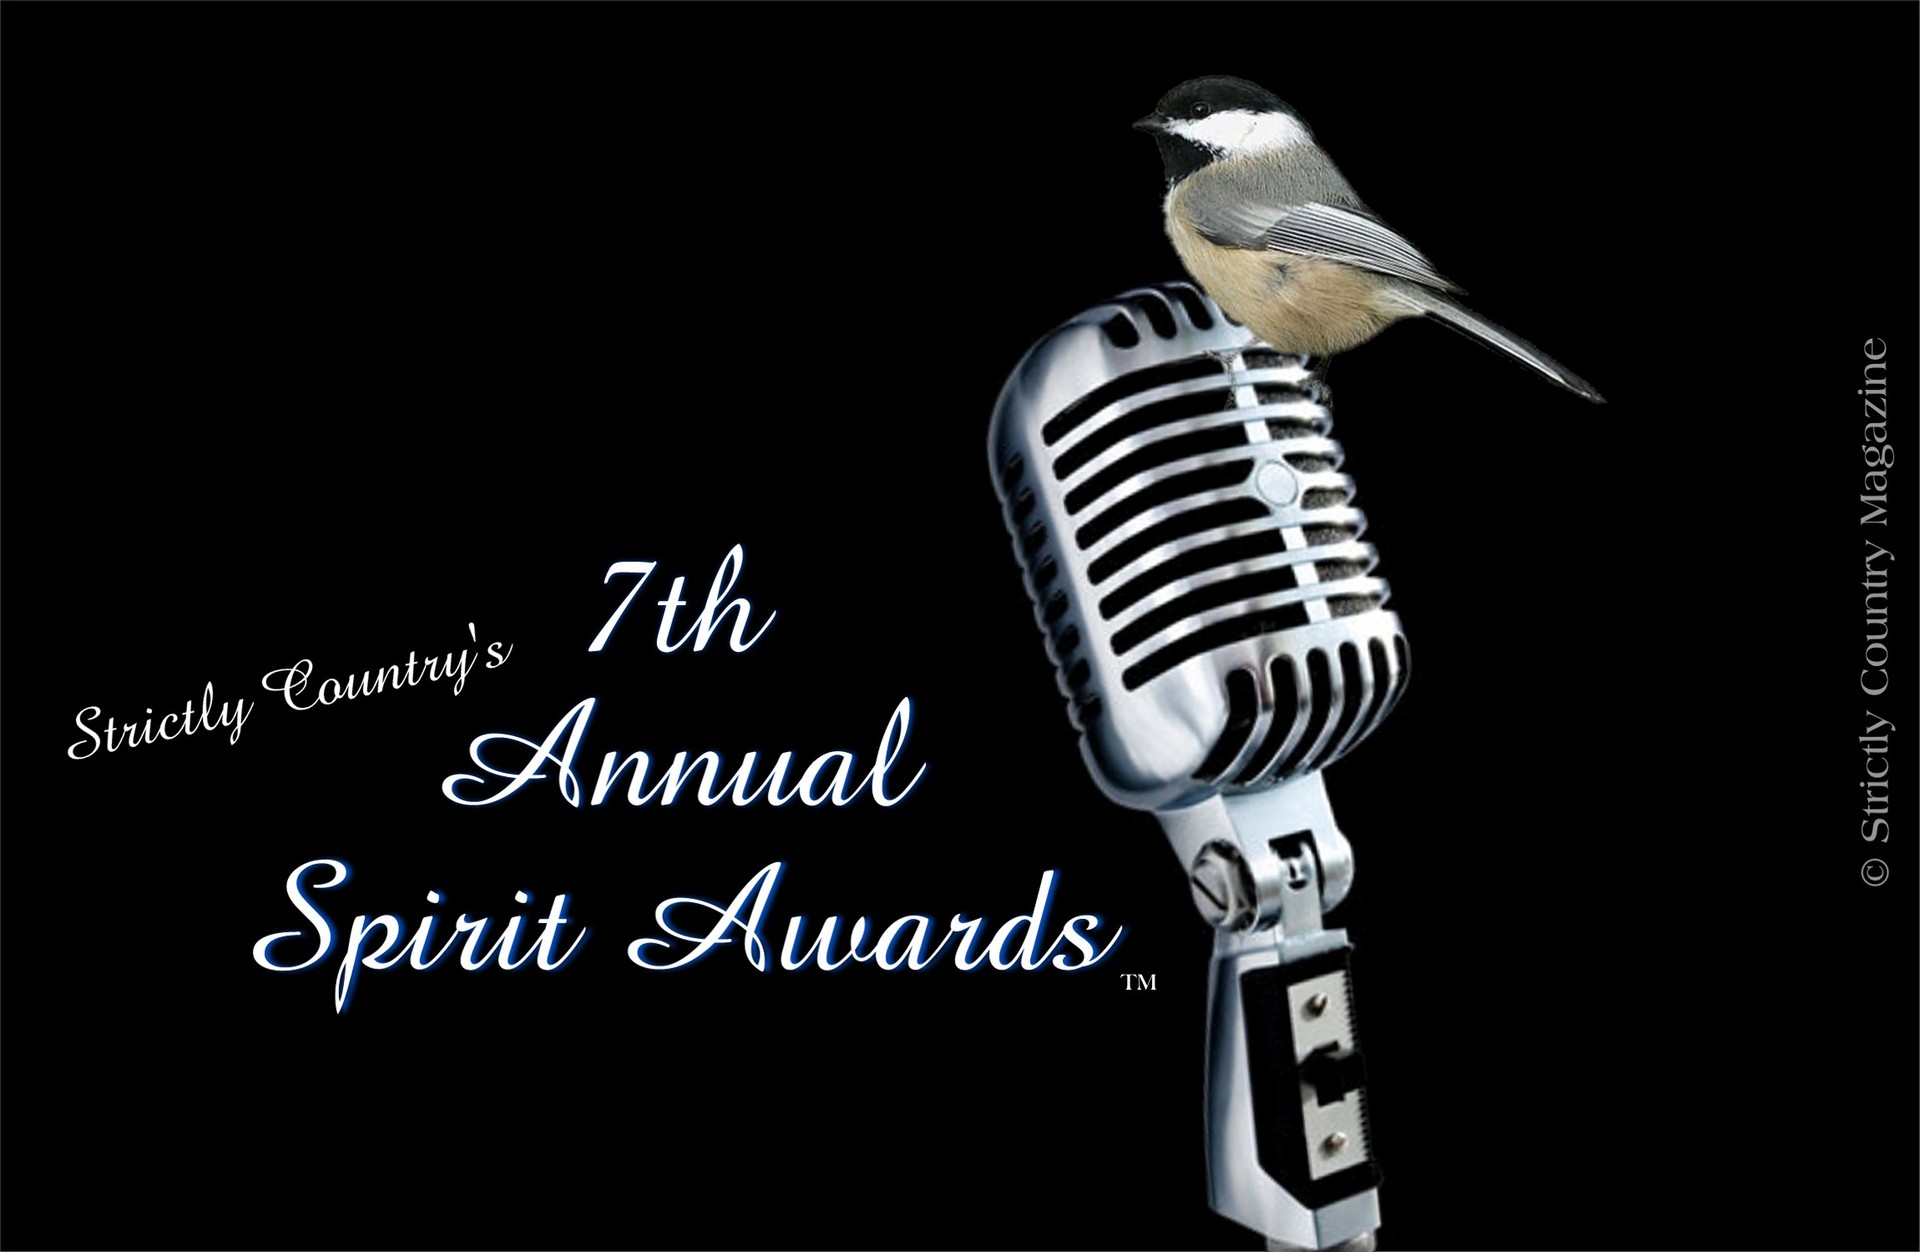 Strictly Country Magazine copyright 7th Annual Spirit Awards official logo